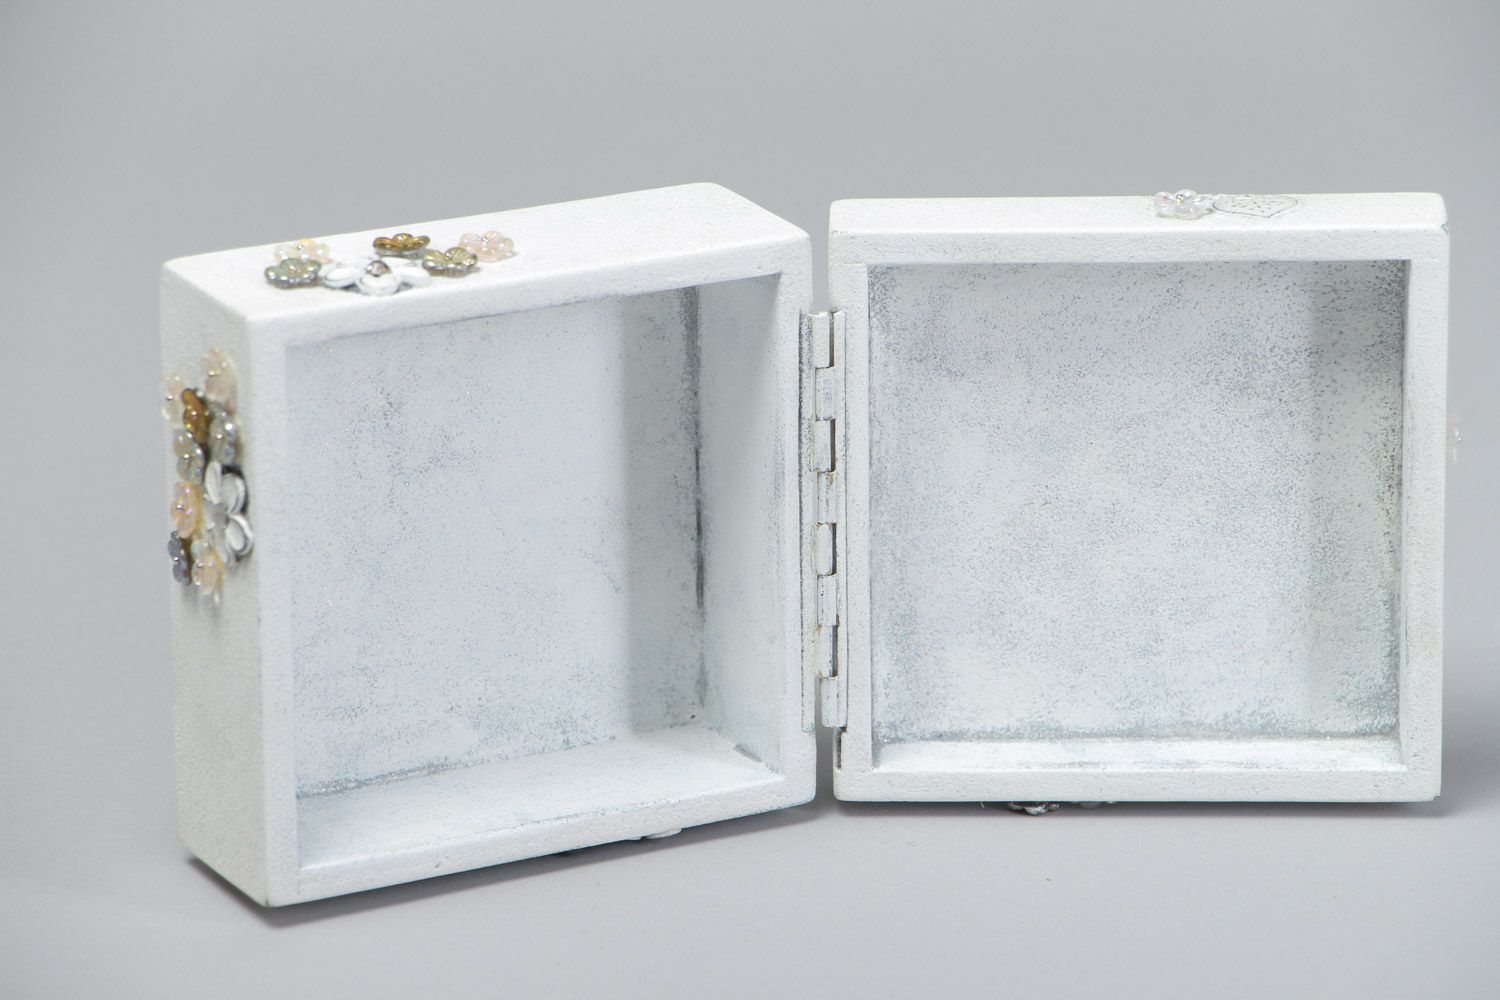 Handmade magnificent white jewelry box inlaid with glass and metal elements photo 3